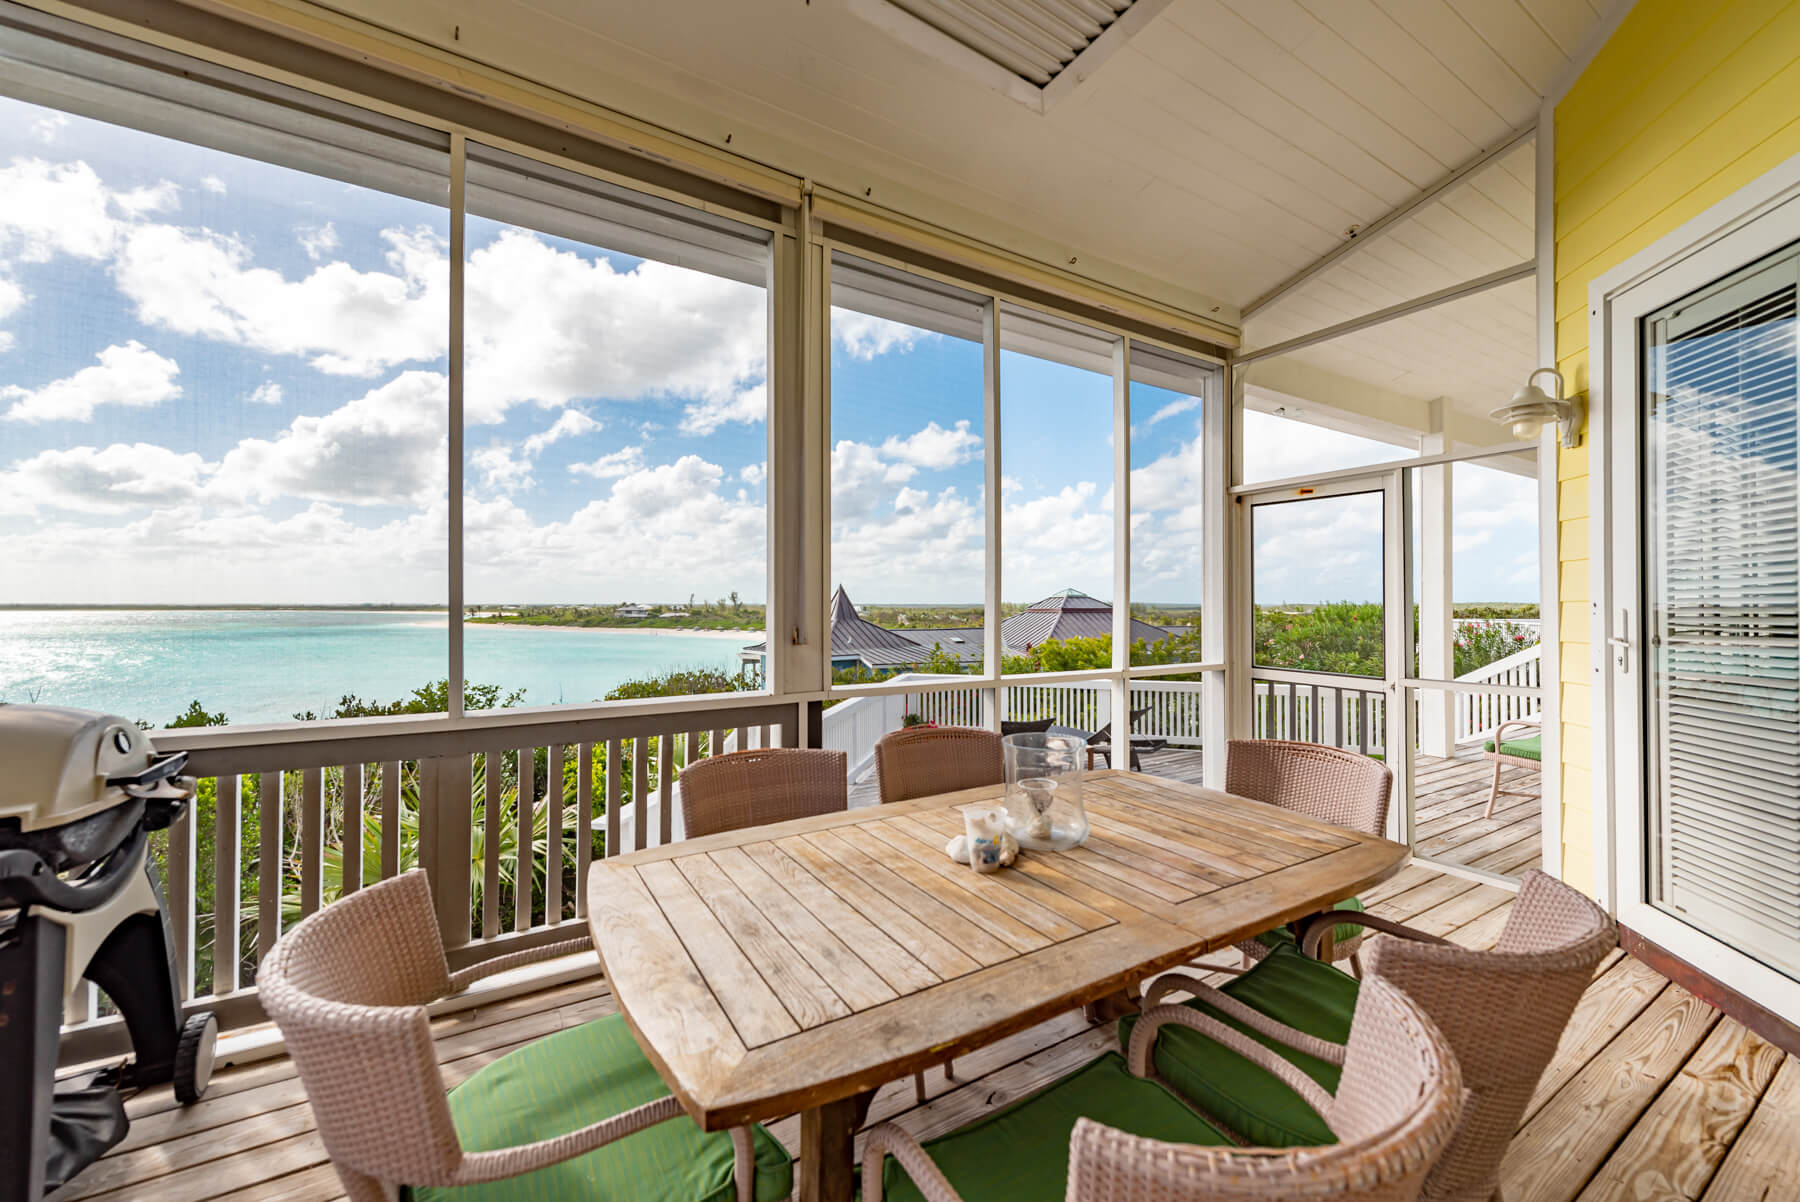 Beachfront villa image of a property at The Abaco Club